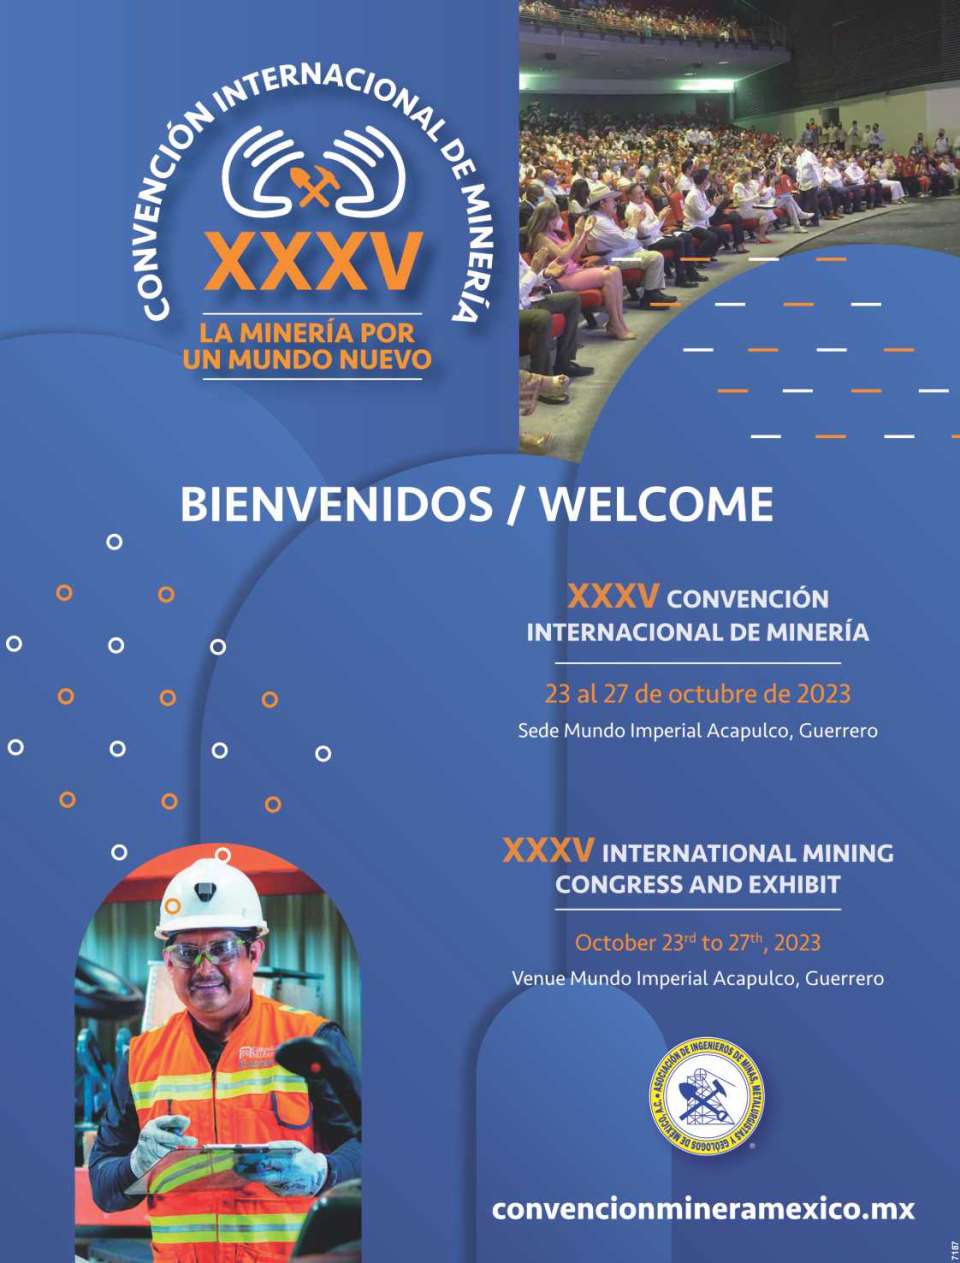 October 23 to 27, 2023 at Acapulco Mundo Imperial. Mining for a new world.